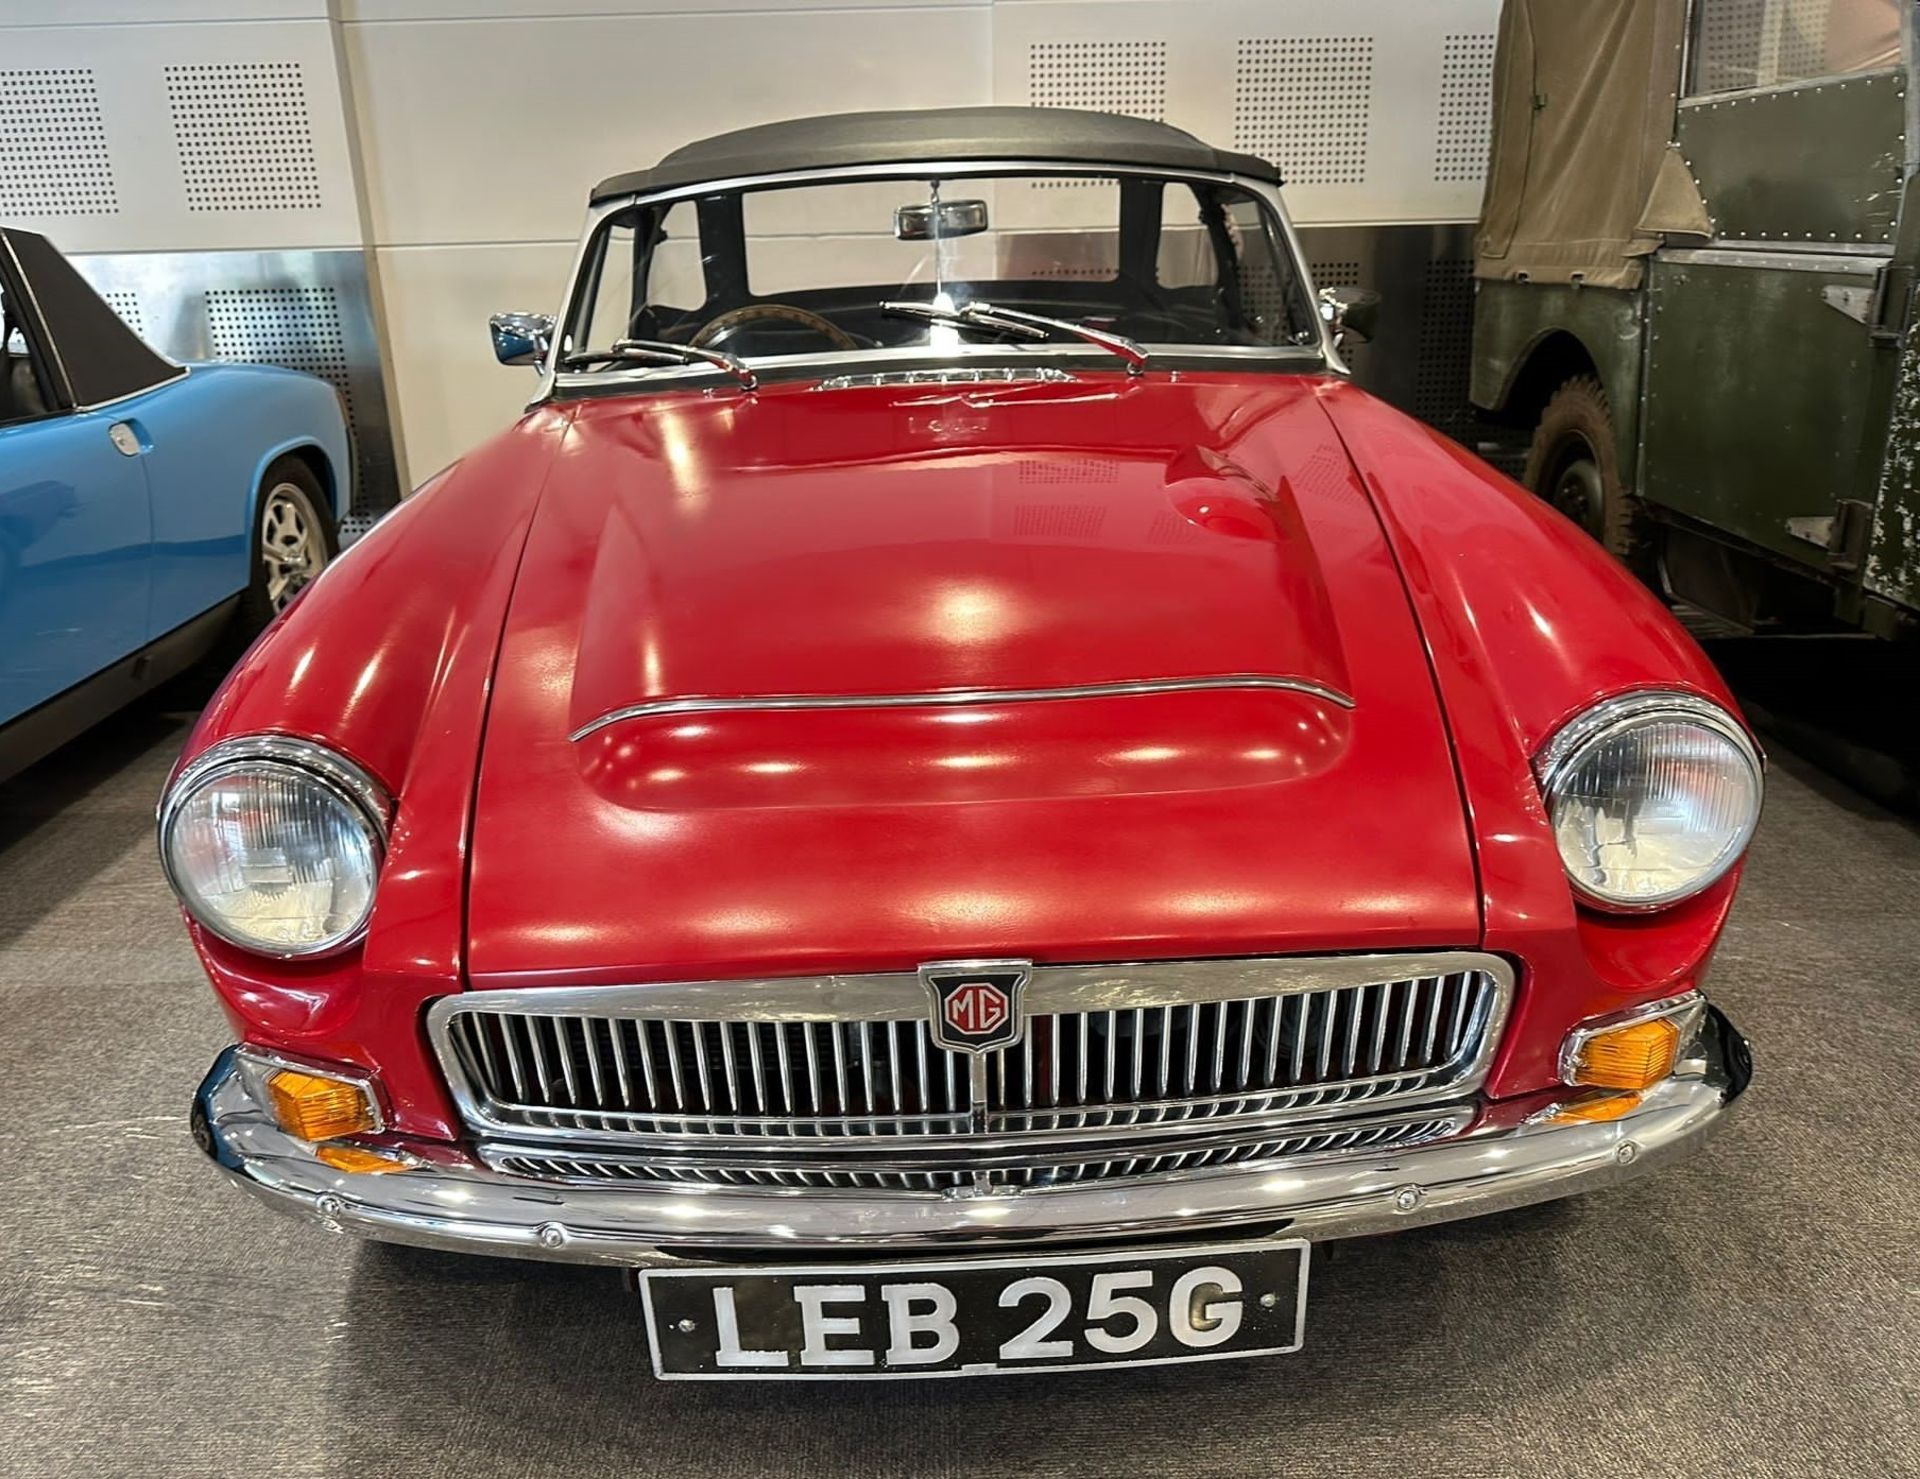 1968 MG C Downton Roadster Registration number LEB 25G Tartan red with a black interior with red - Image 3 of 42